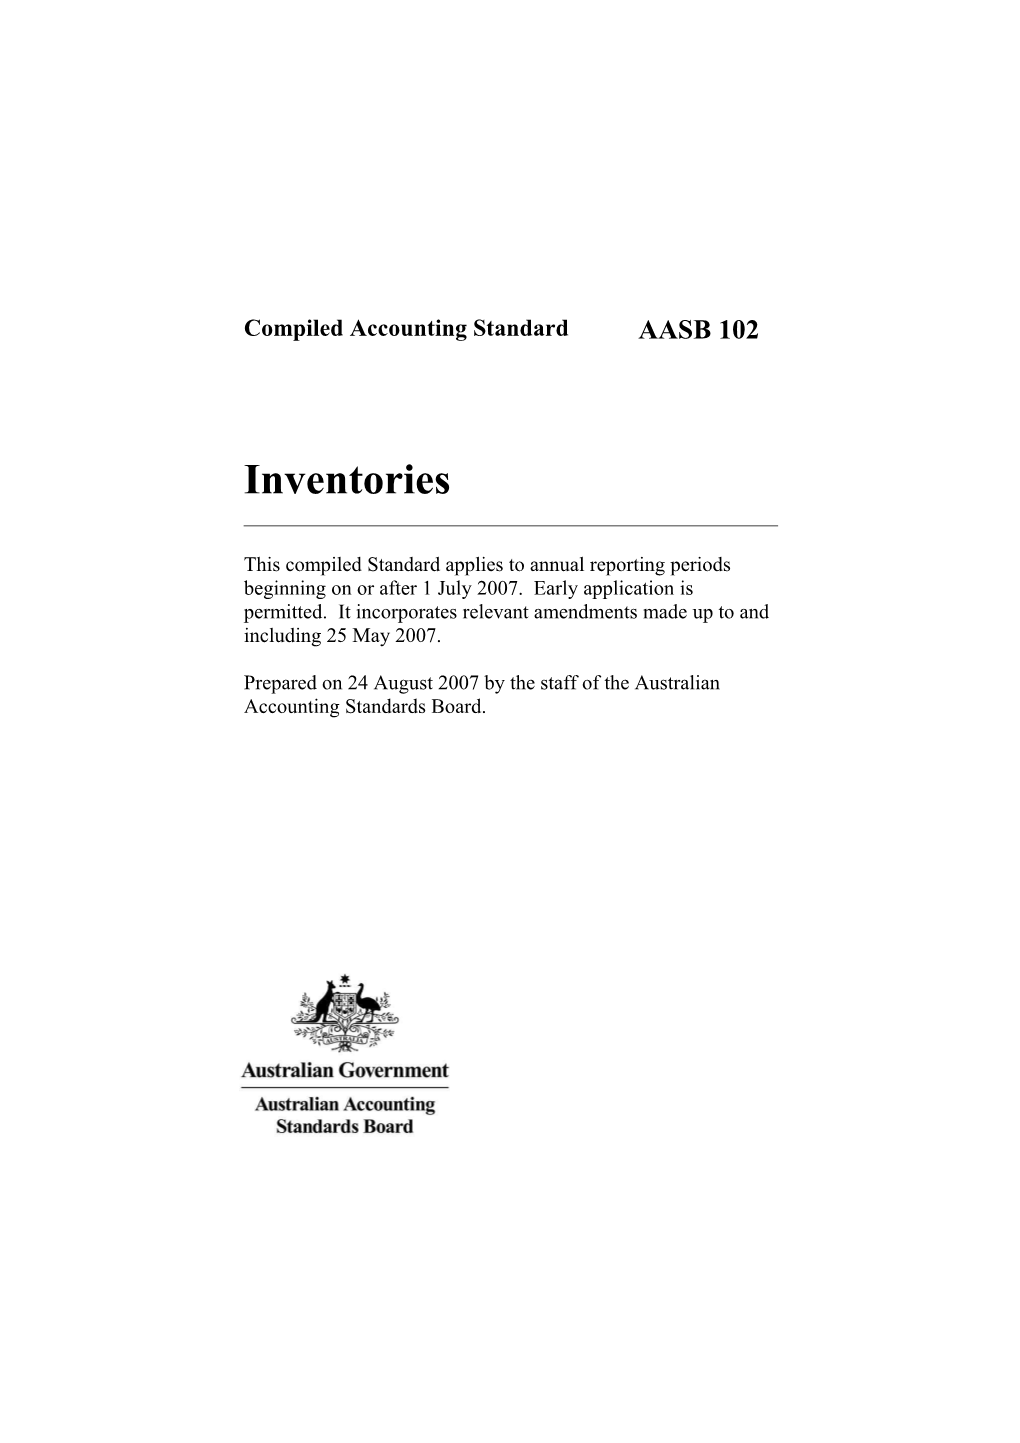 Prepared on 24August2007 by the Staff of the Australian Accounting Standards Board